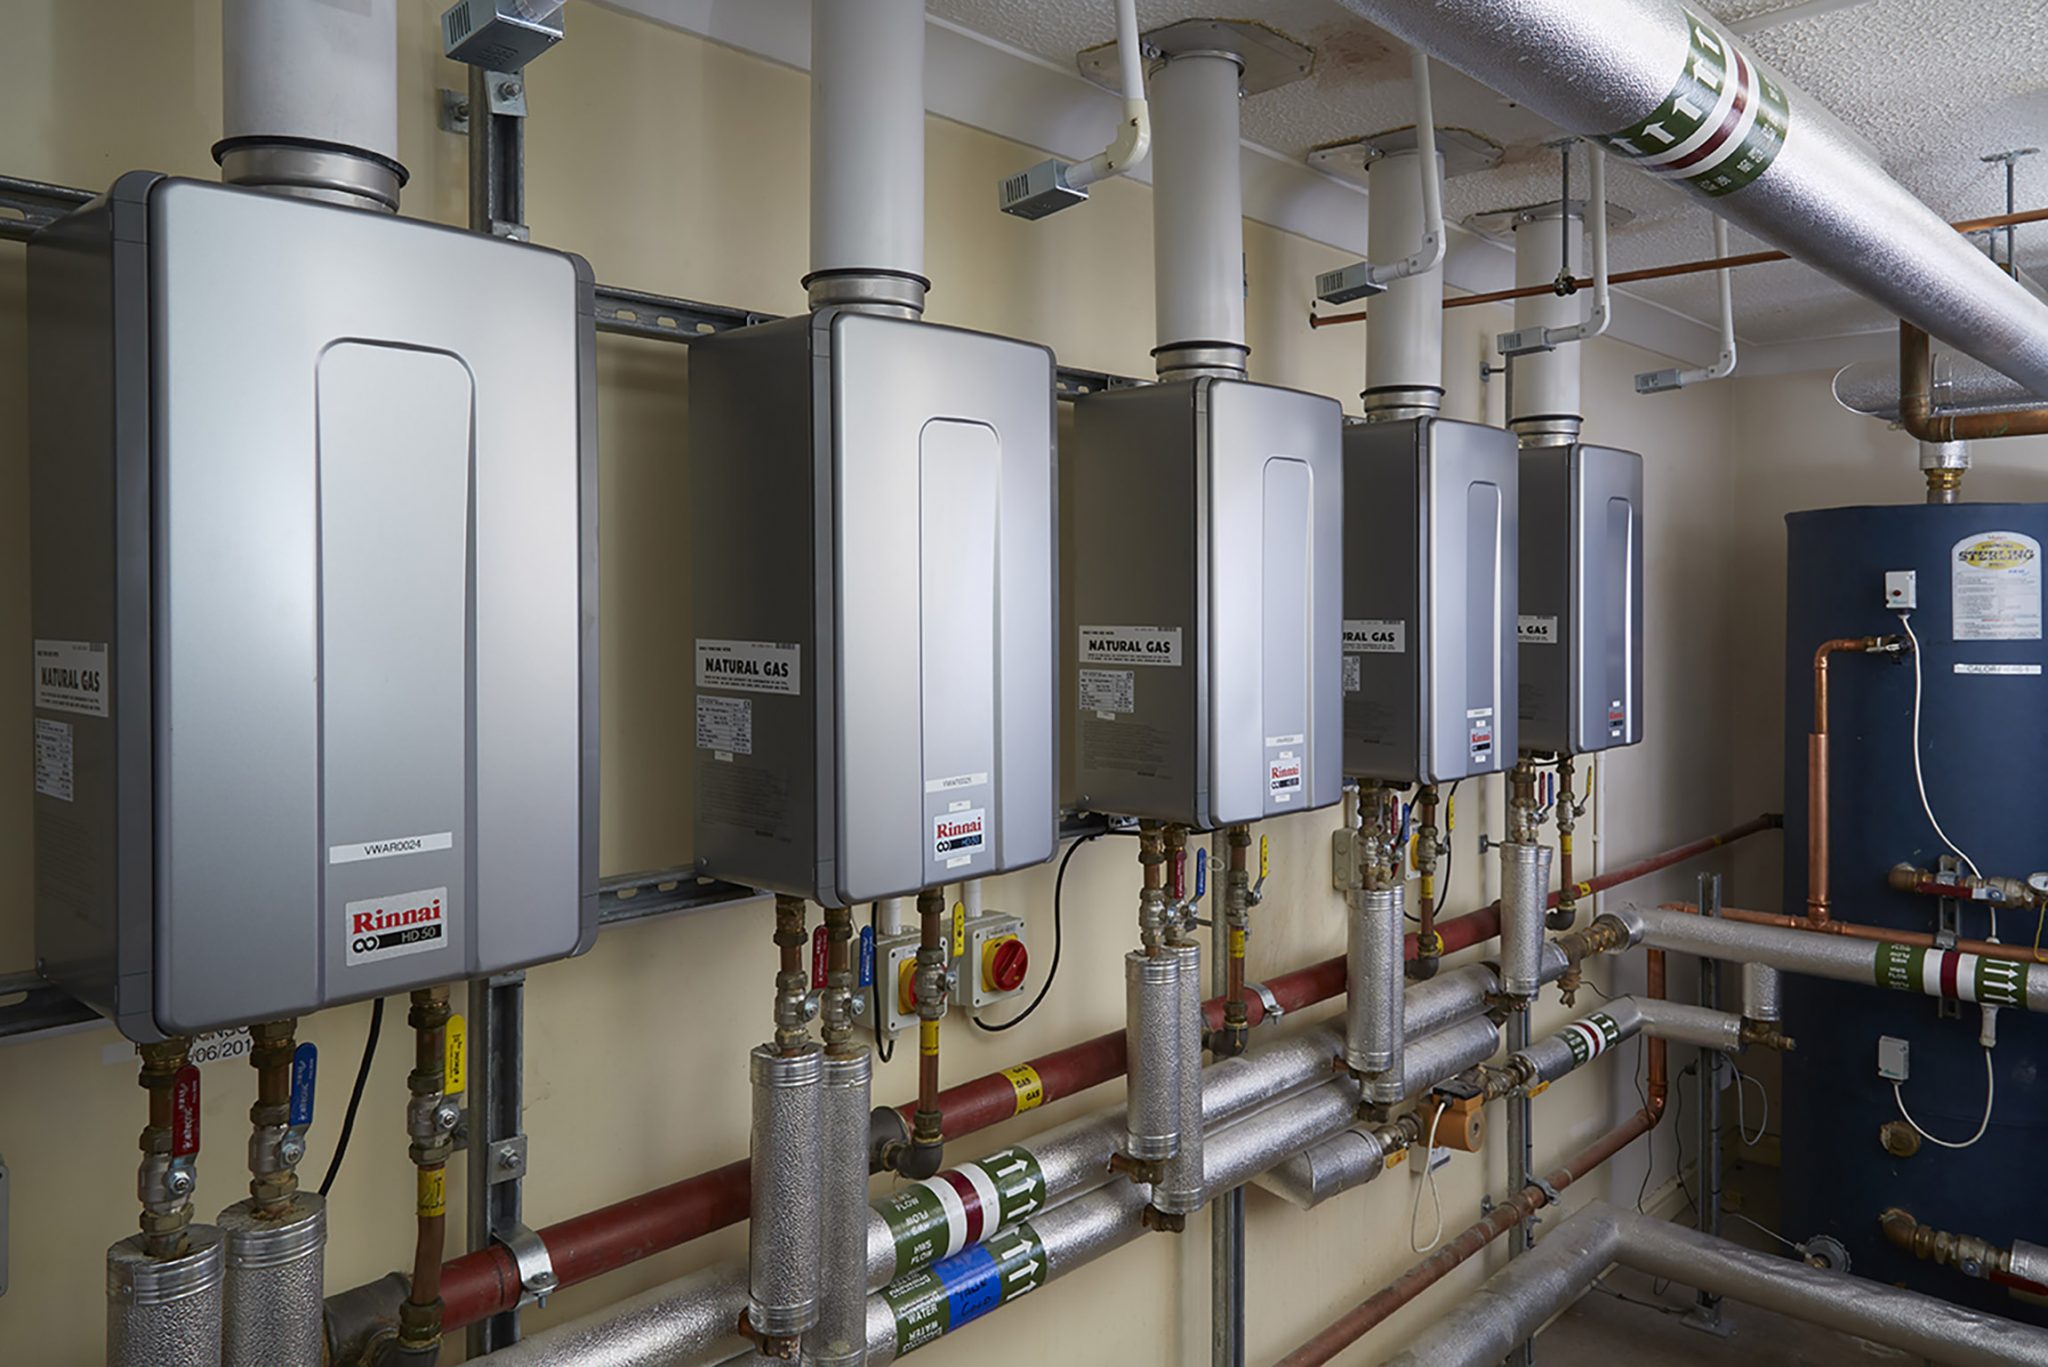 MARKET SURVEY SHOWS RINNAI TOPS FOR QUALITY PRODUCT IN CONTINUOUS FLOW WATER HEATING